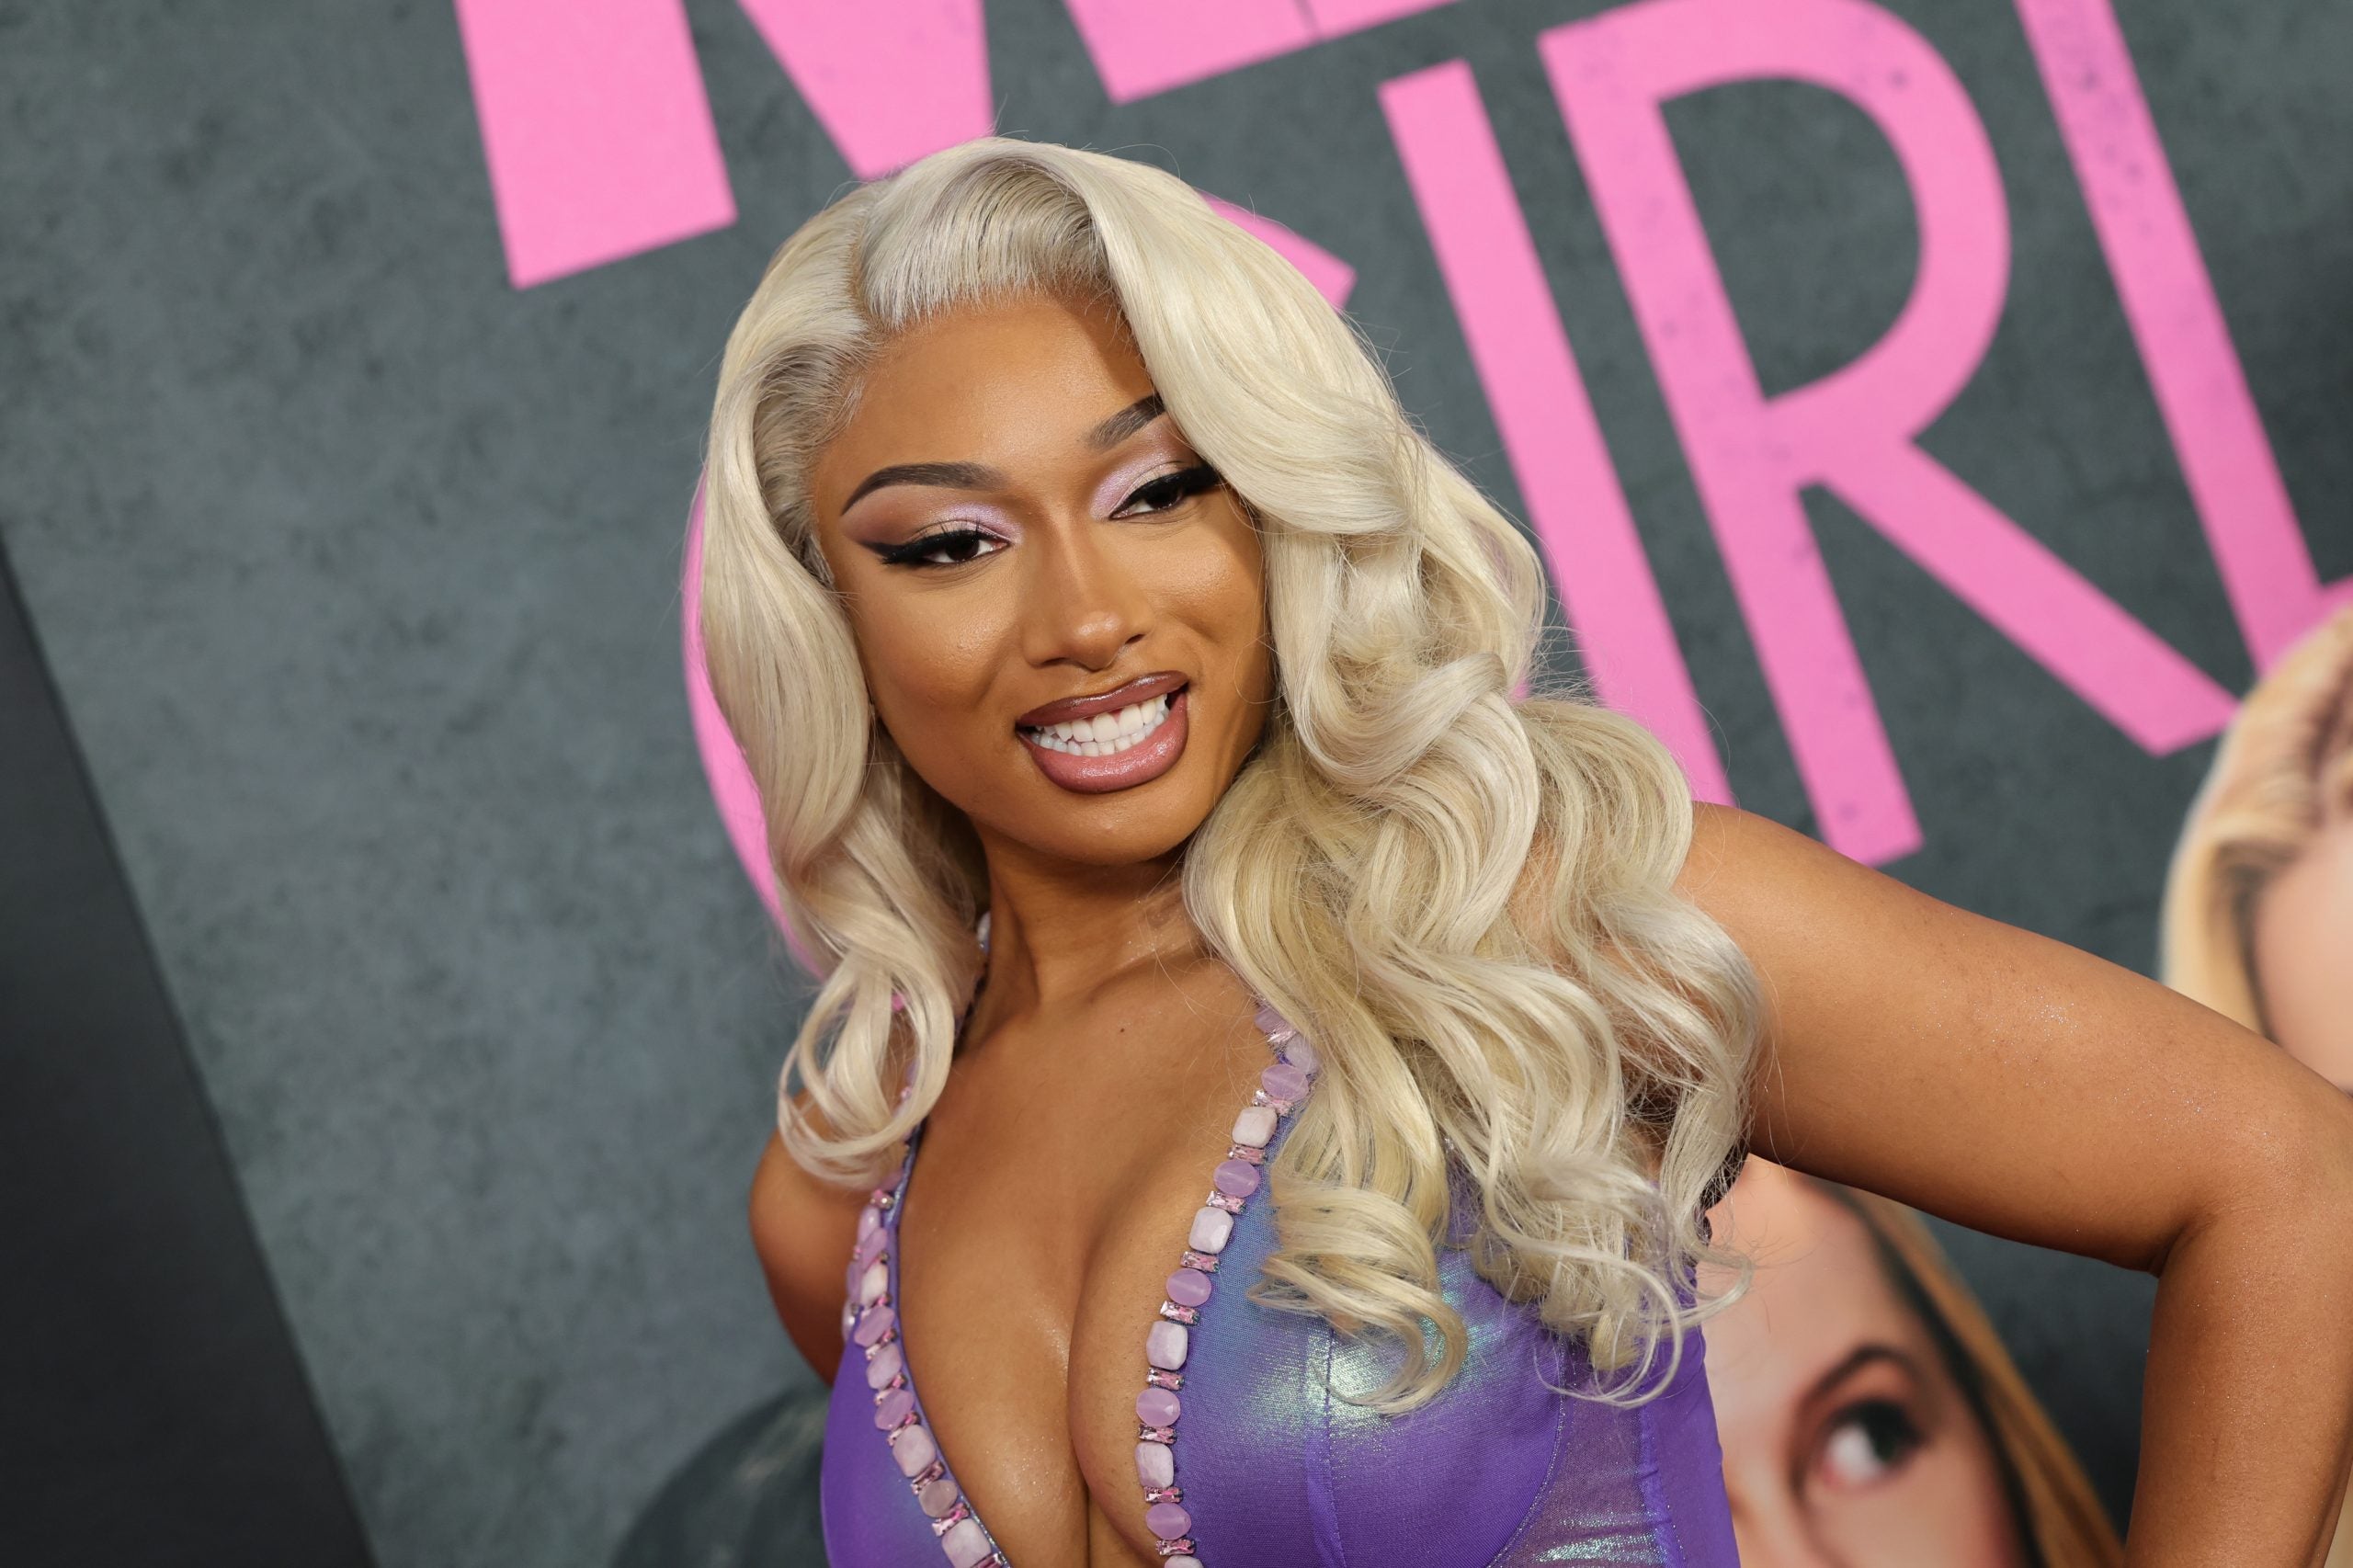 Megan Thee Stallion Announces 'Hot Girl Summer' Tour Across US And Europe